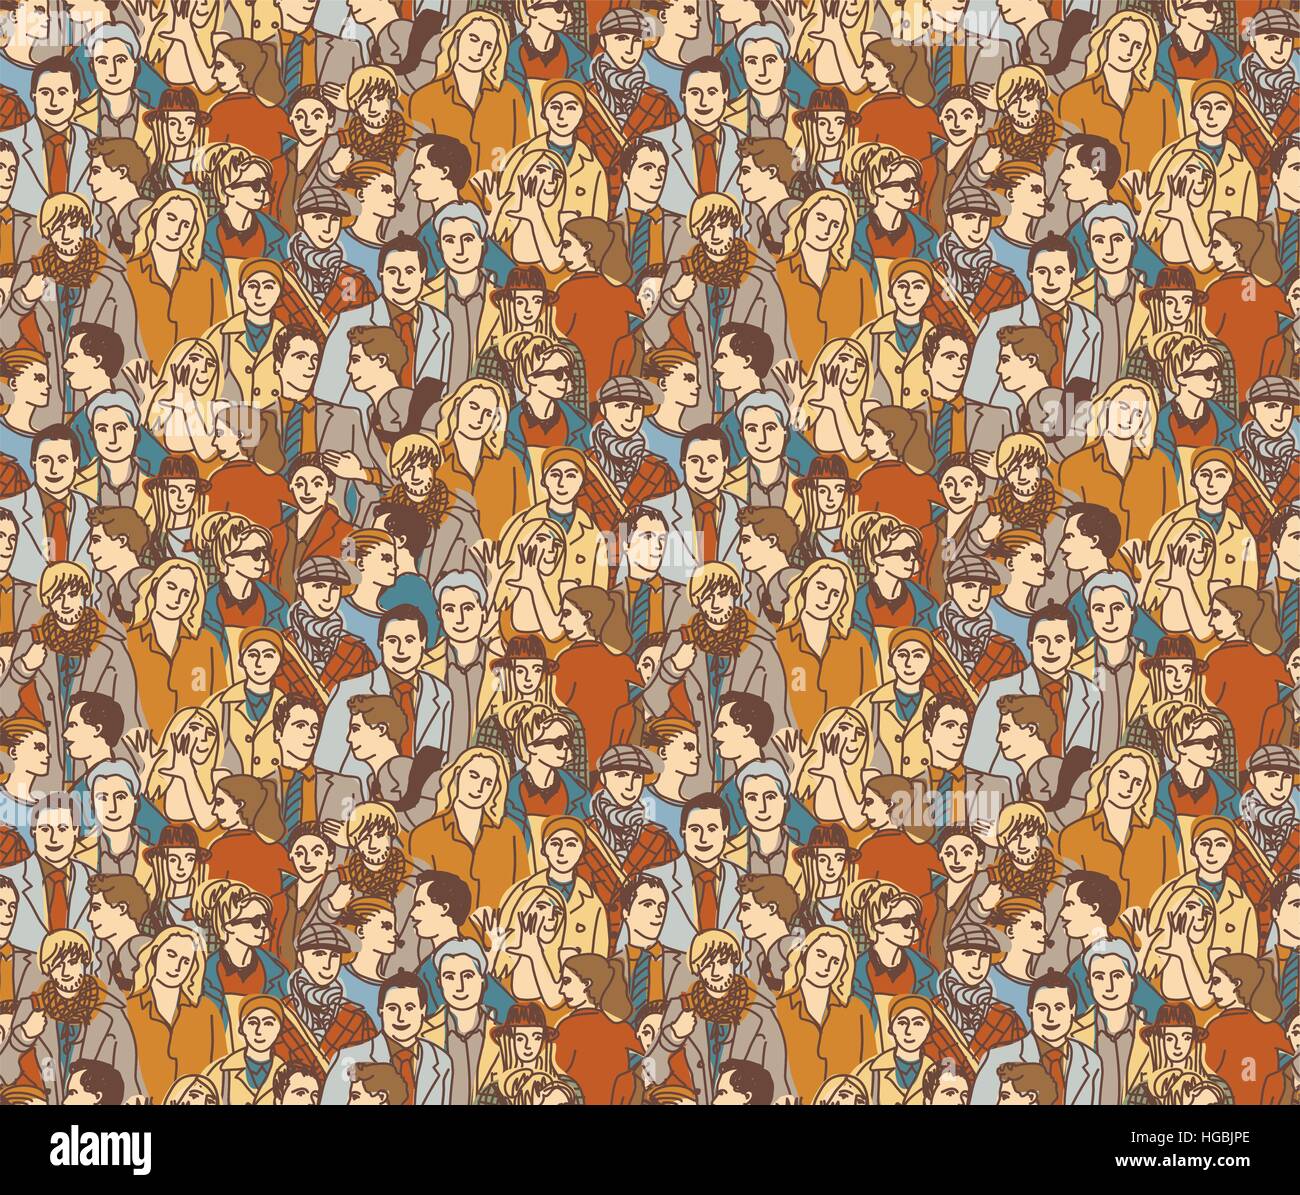 Crowd people color seamless pattern. Stock Vector